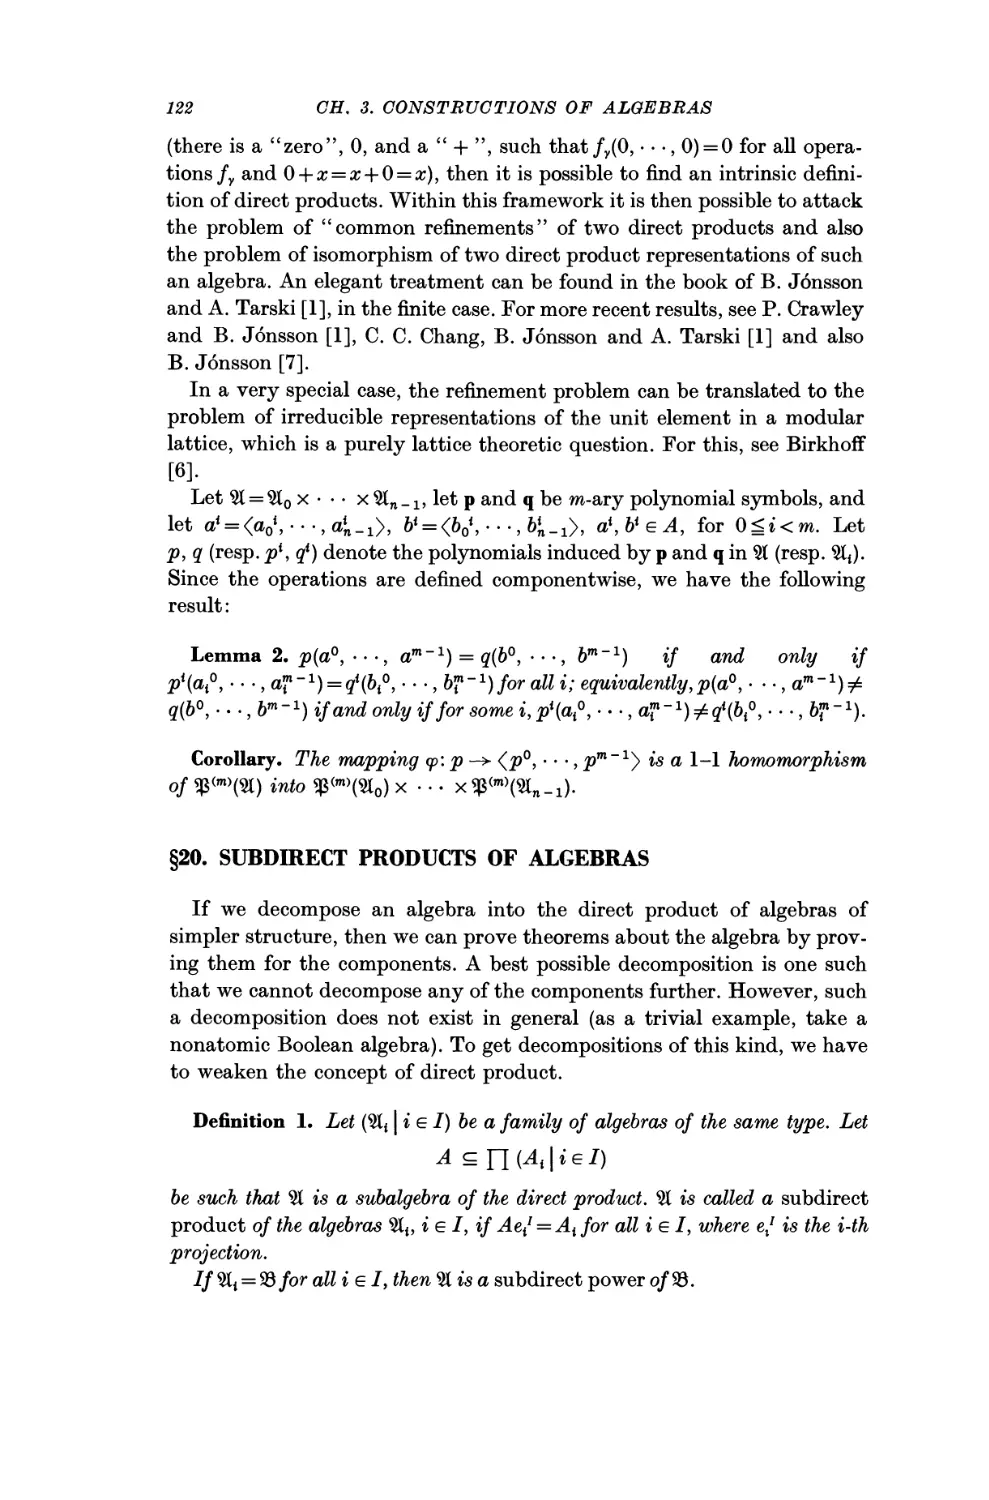 §20. Subdirect Products of Algebras